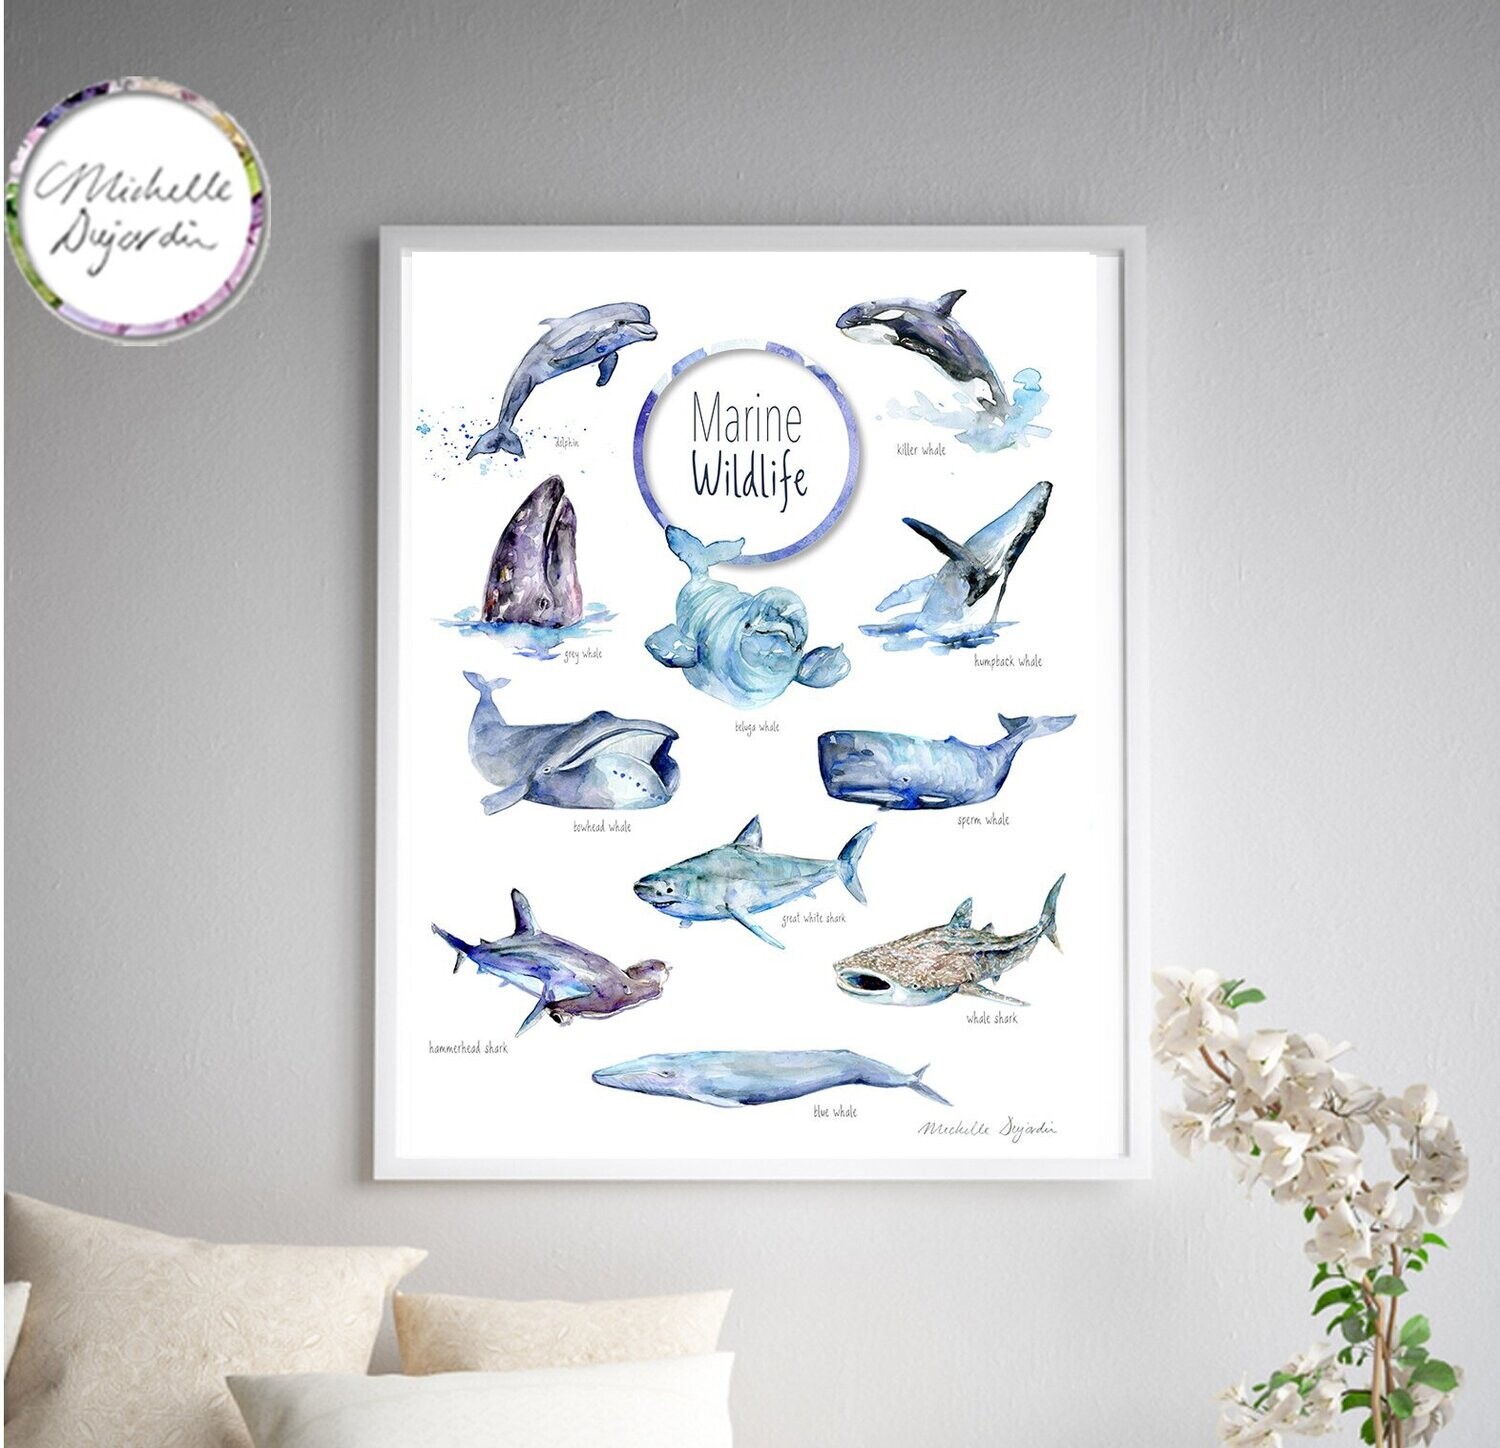 Marine Wildlife whale sharks and dolphin species art print